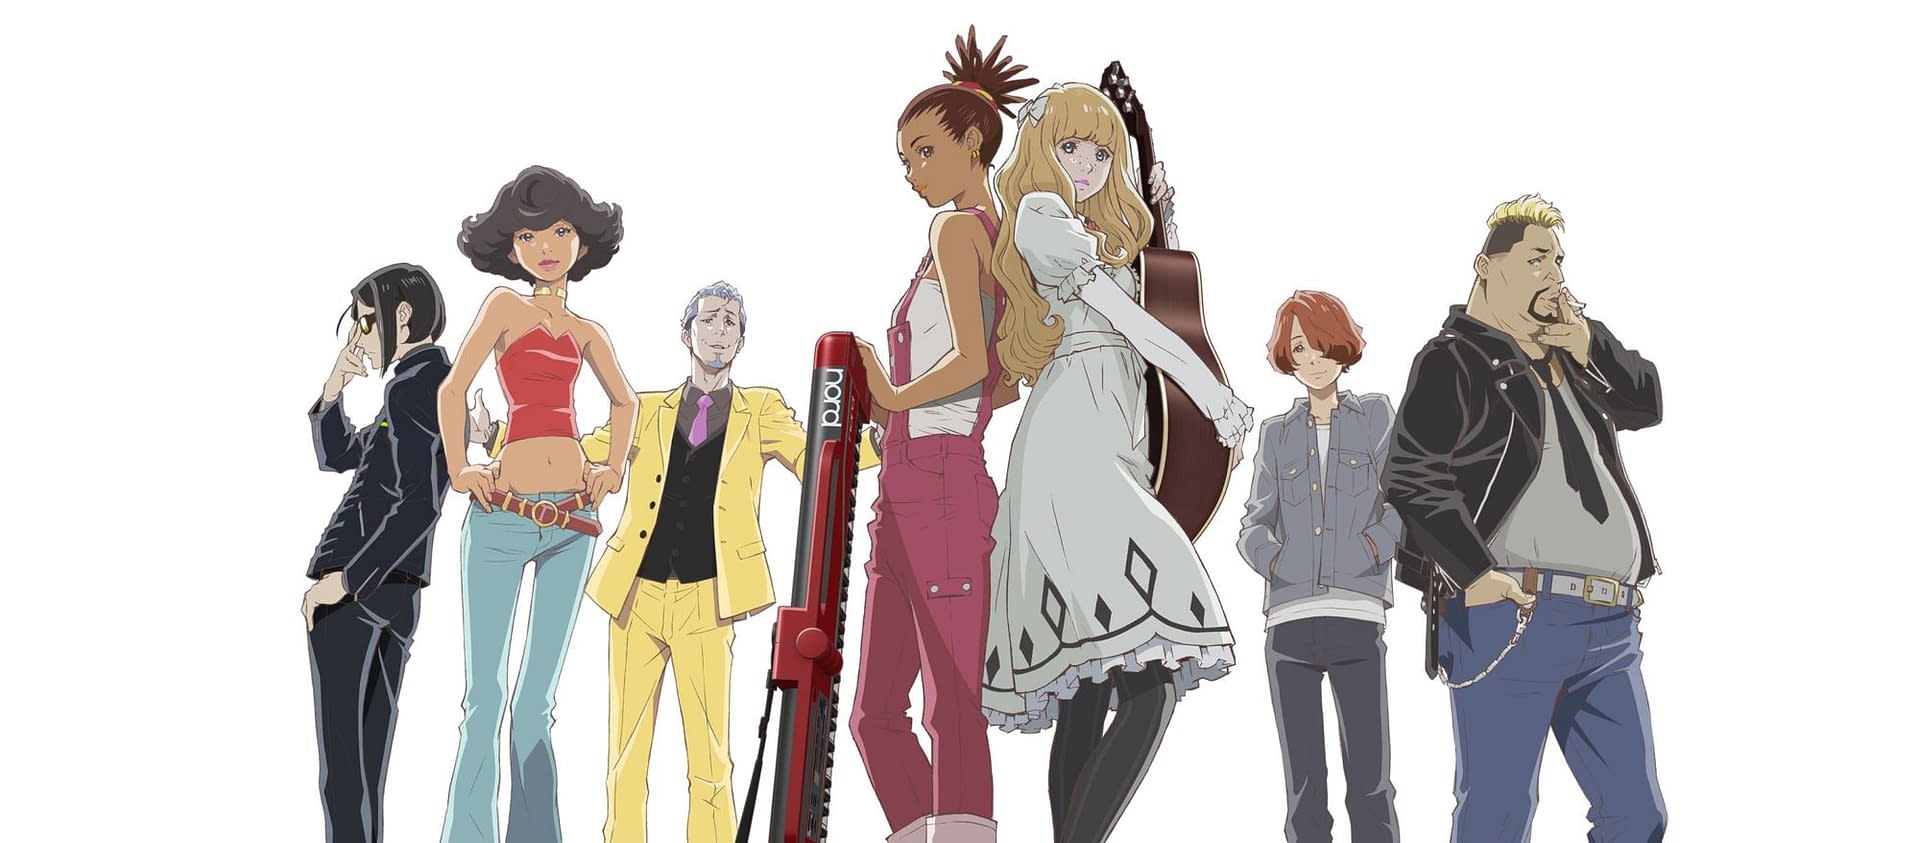 Why Carole & Tuesday is a Perfect Body of Work